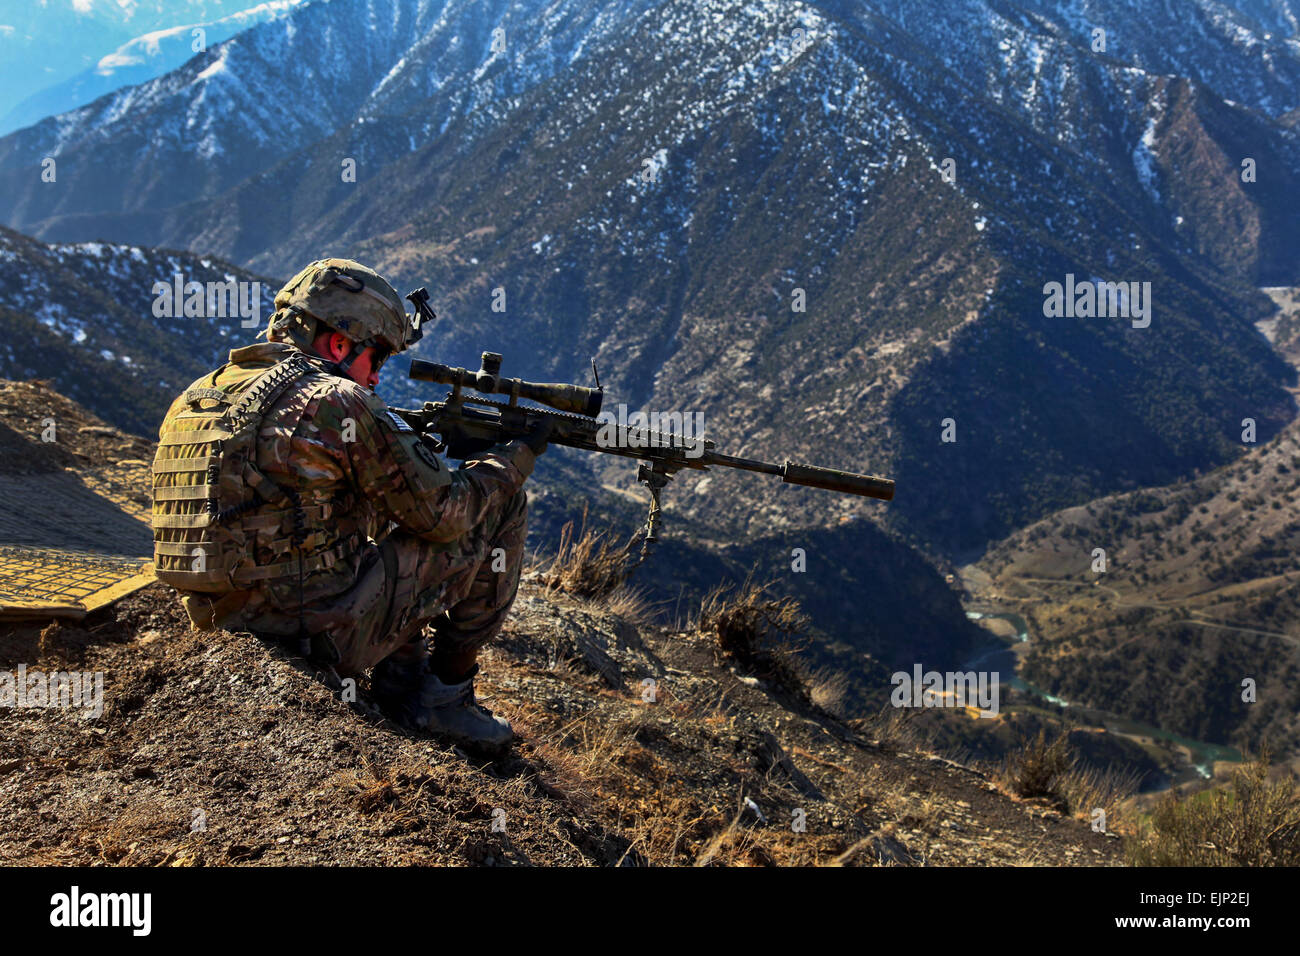 U.S. Army Cpl. Kevin Dehaven, Sniper Team Leader, Headquarters and Headquarters Company, 2nd Battalion, 27th Infantry Regiment, 3rd Brigade Combat Team, 25th Infantry Division, provides security, at Observation Post Mangol, Feb. 8, 2012, in the Nari district, Kunar province, Afghanistan. Stock Photo